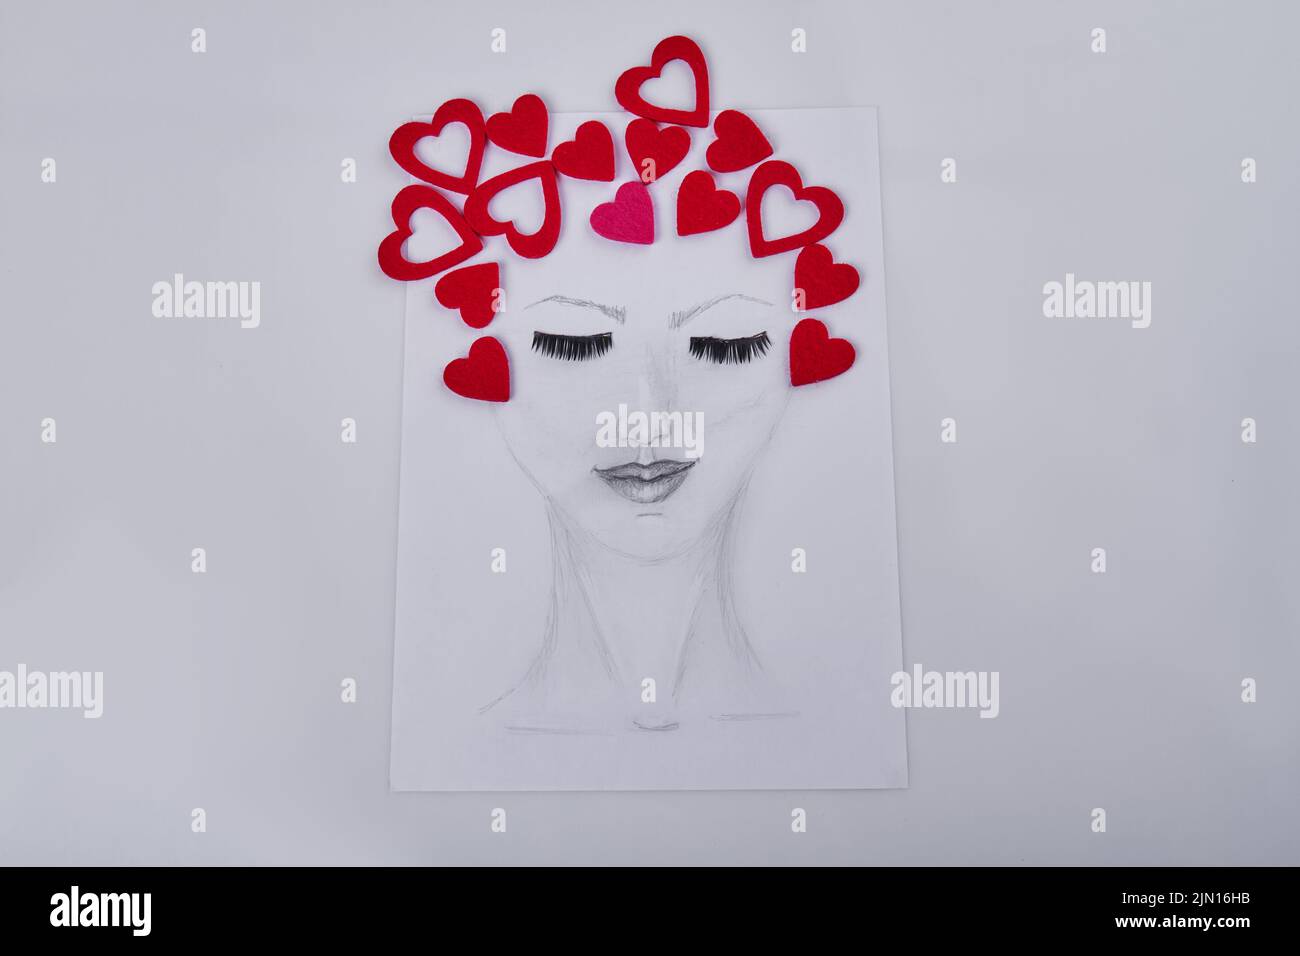 Hand drawn female face with hearts represent her hair. Portrait of woman with eyes closed. Stock Photo